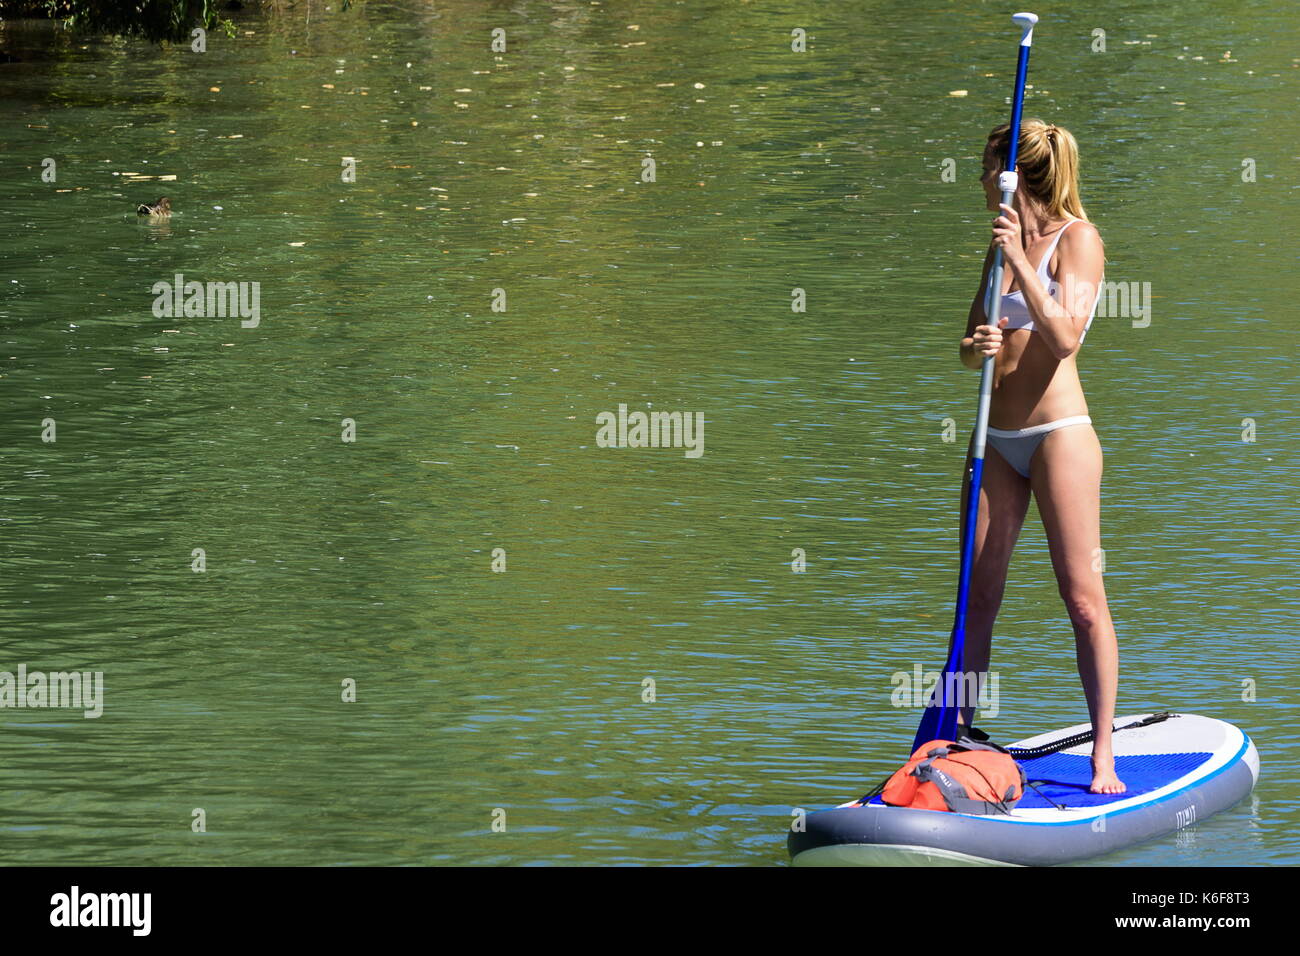 Aranjuez, Madrid, Spain. 10st September, 2017. A woman practicing paddle surf by the Tagus river in Aranjuez, Spain. Stock Photo